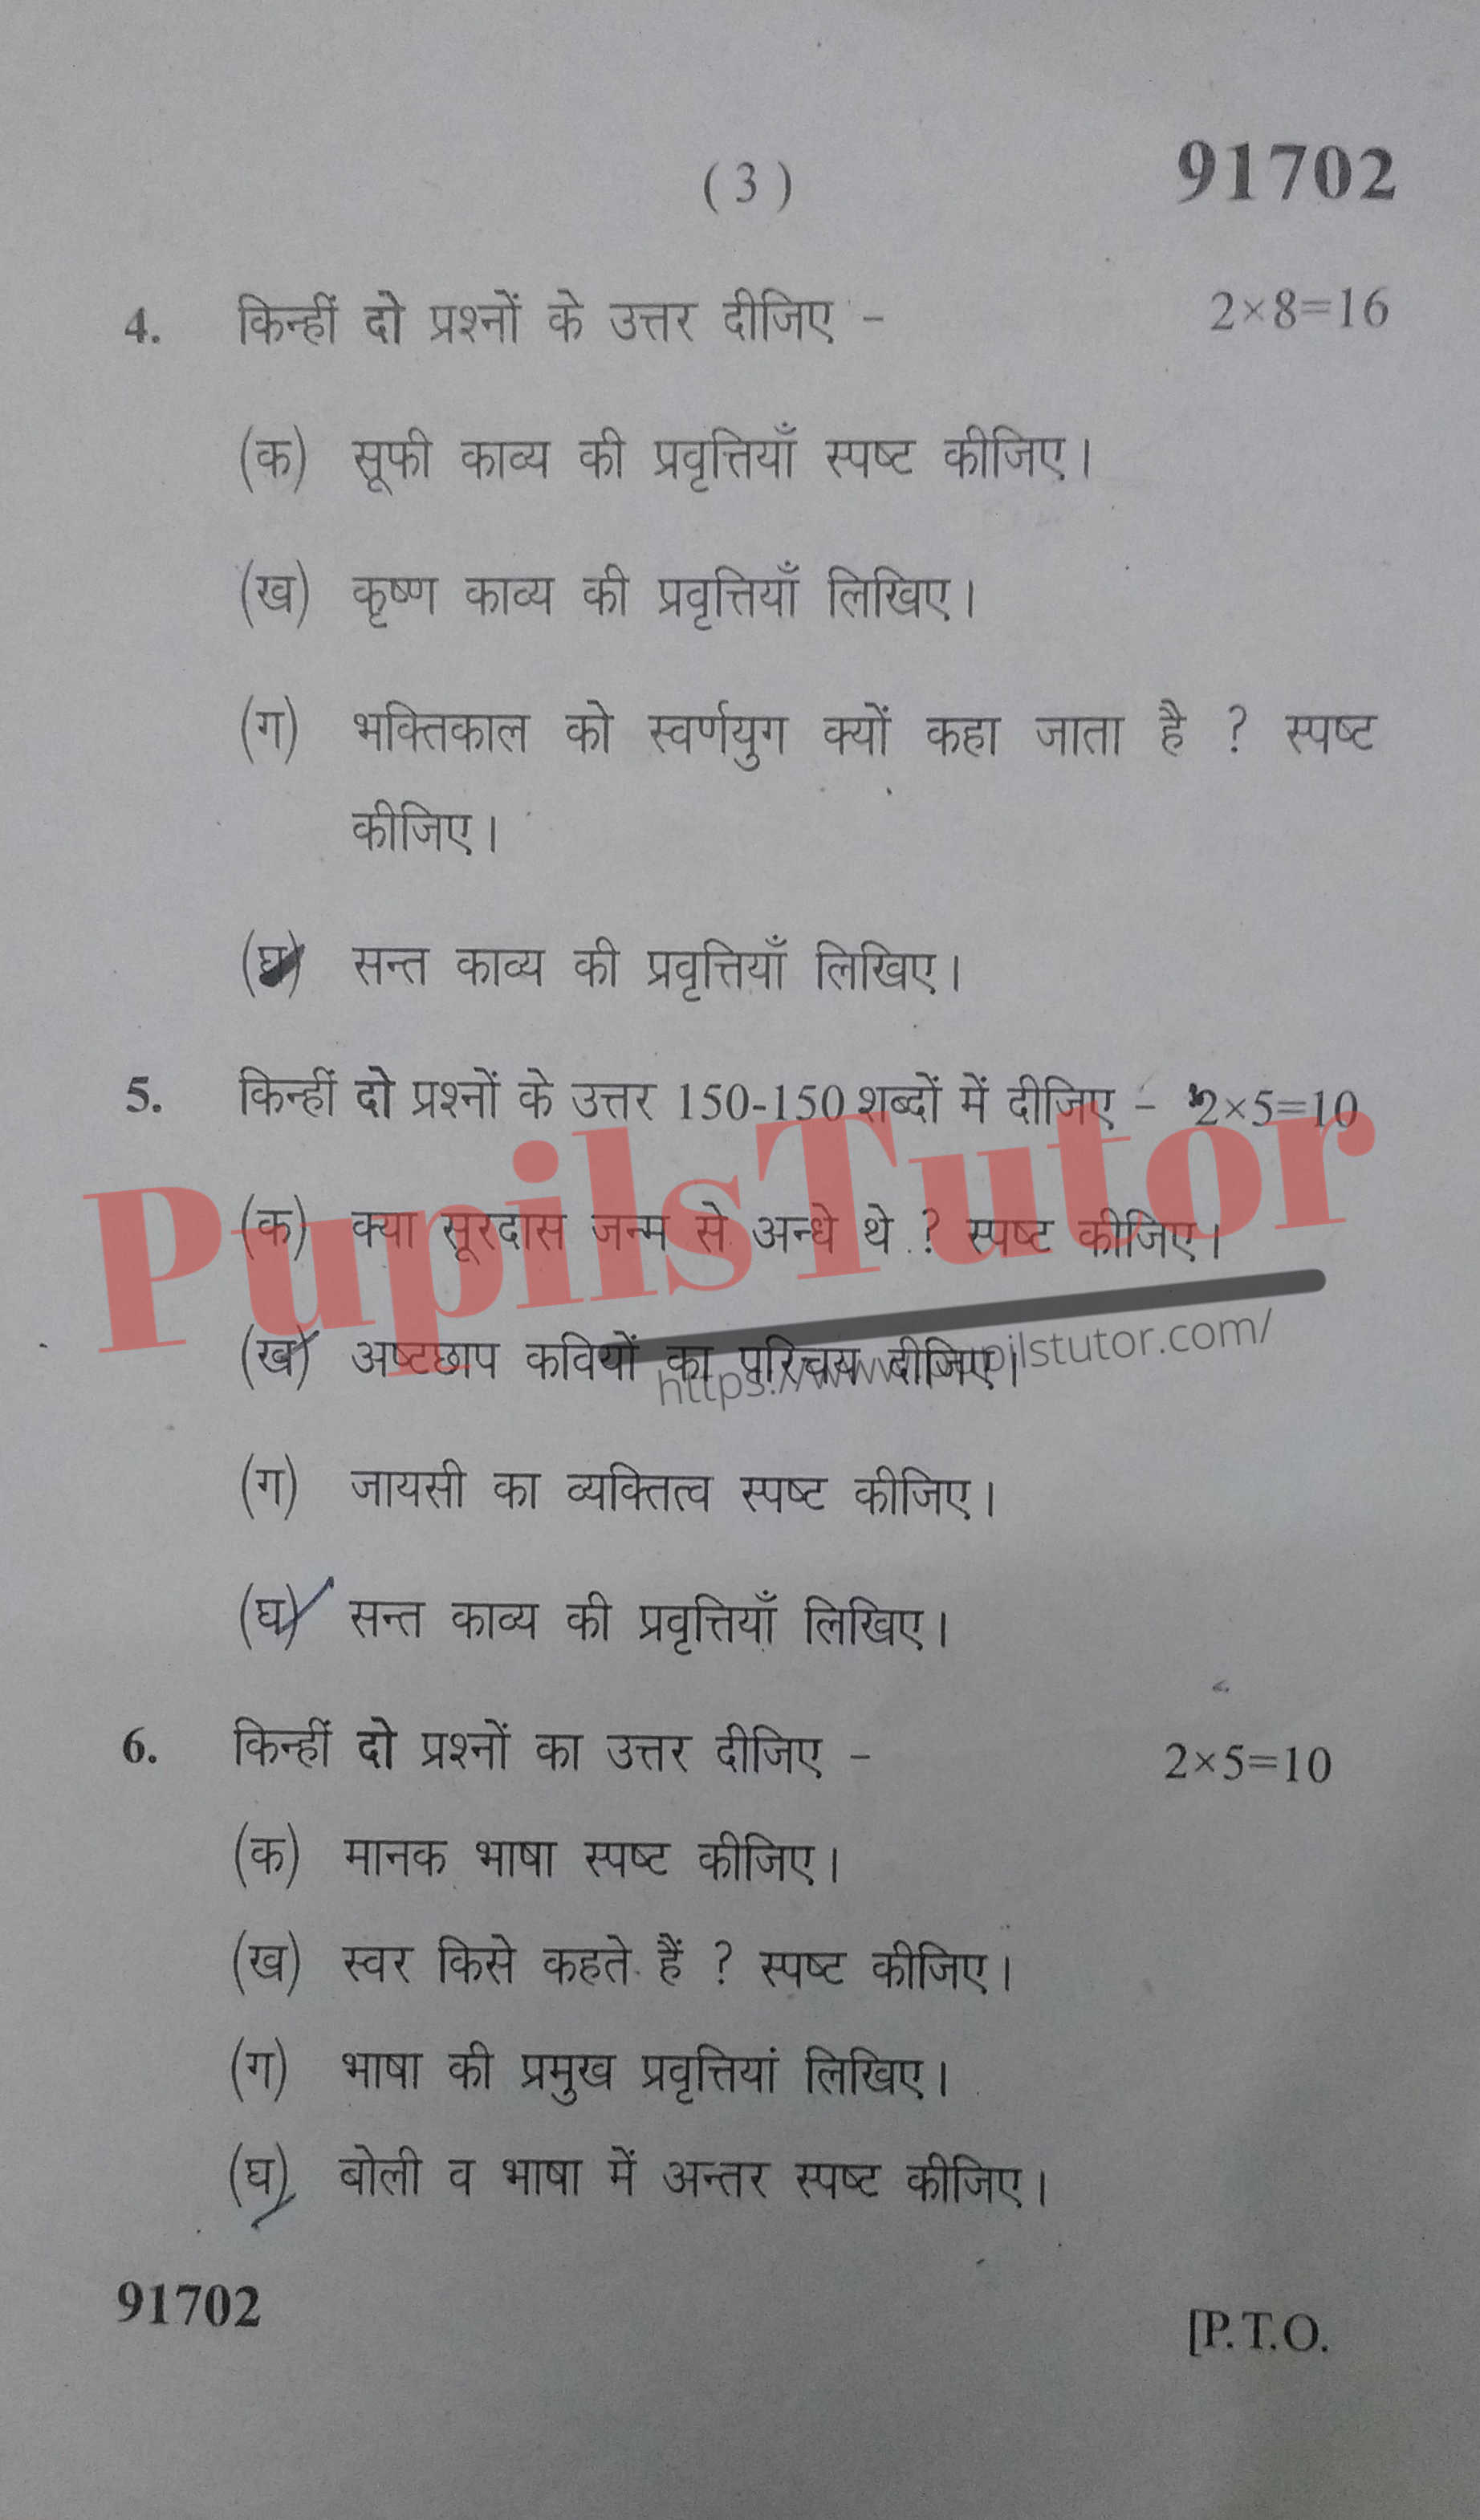 Free Download PDF Of M.D. University B.A. Second Semester Latest Question Paper For Hindi Subject (Page 3) - https://www.pupilstutor.com